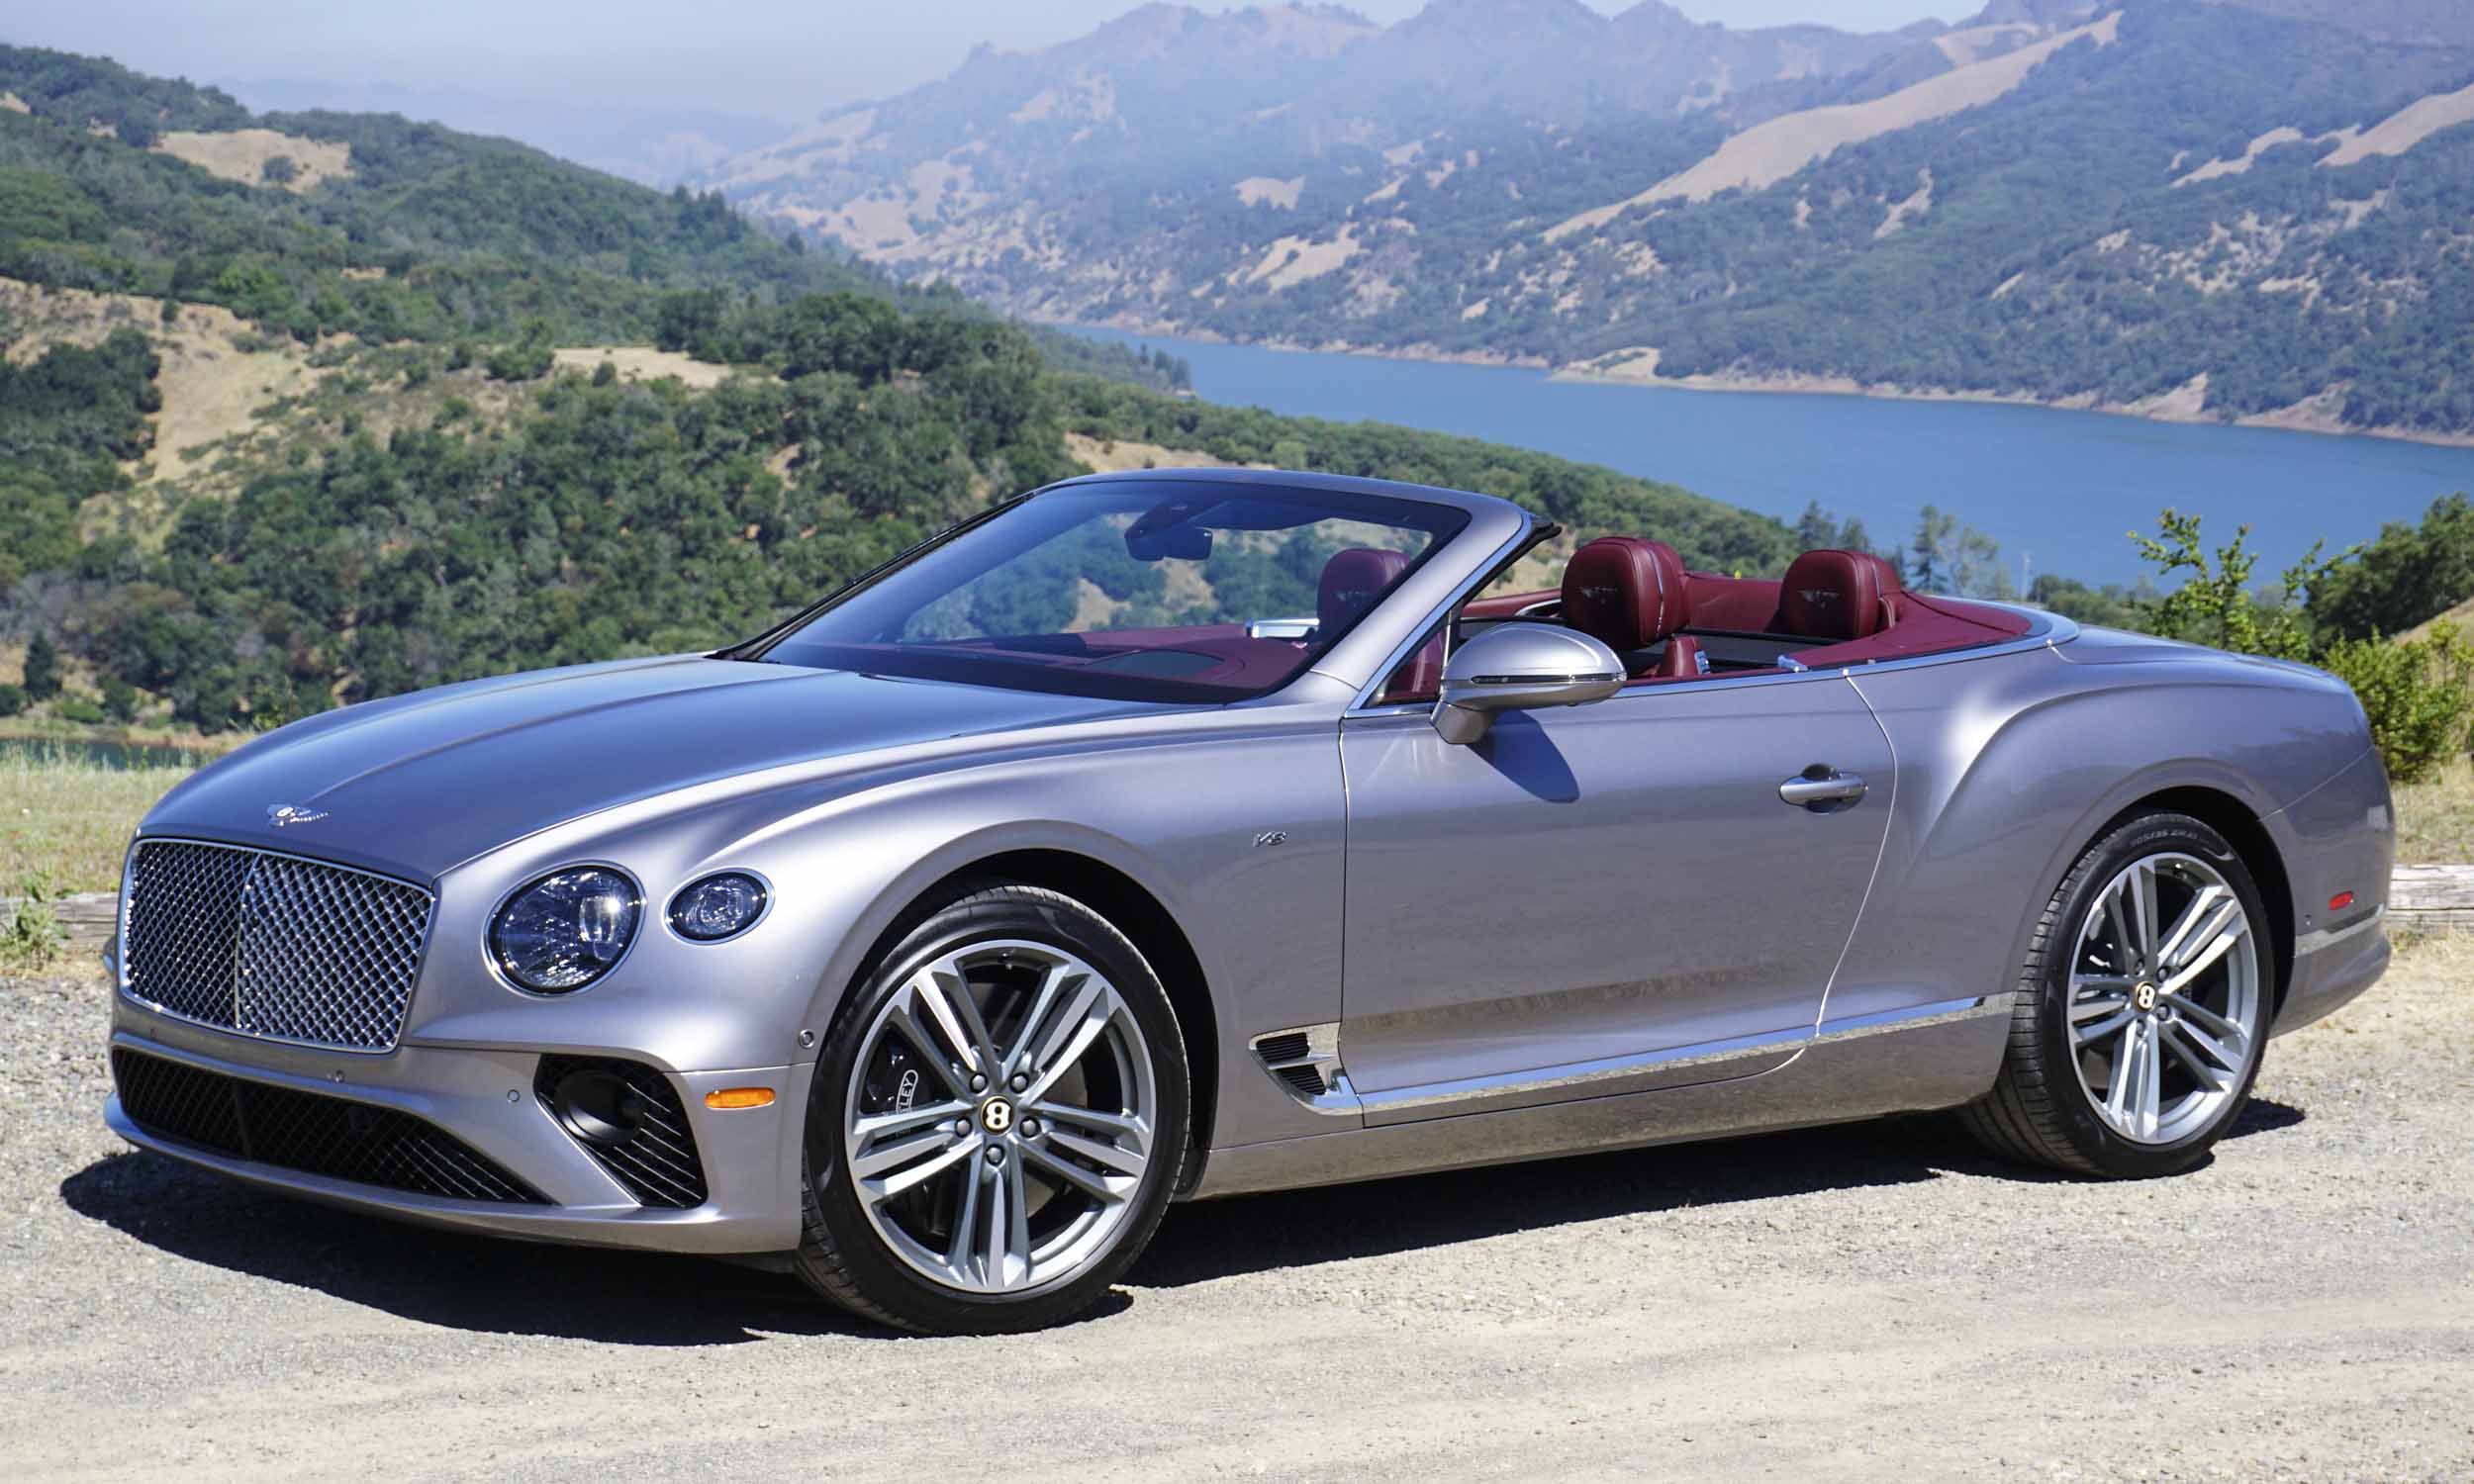 2020 Bentley Continental GT V8: First Drive Review | Our Auto Expert